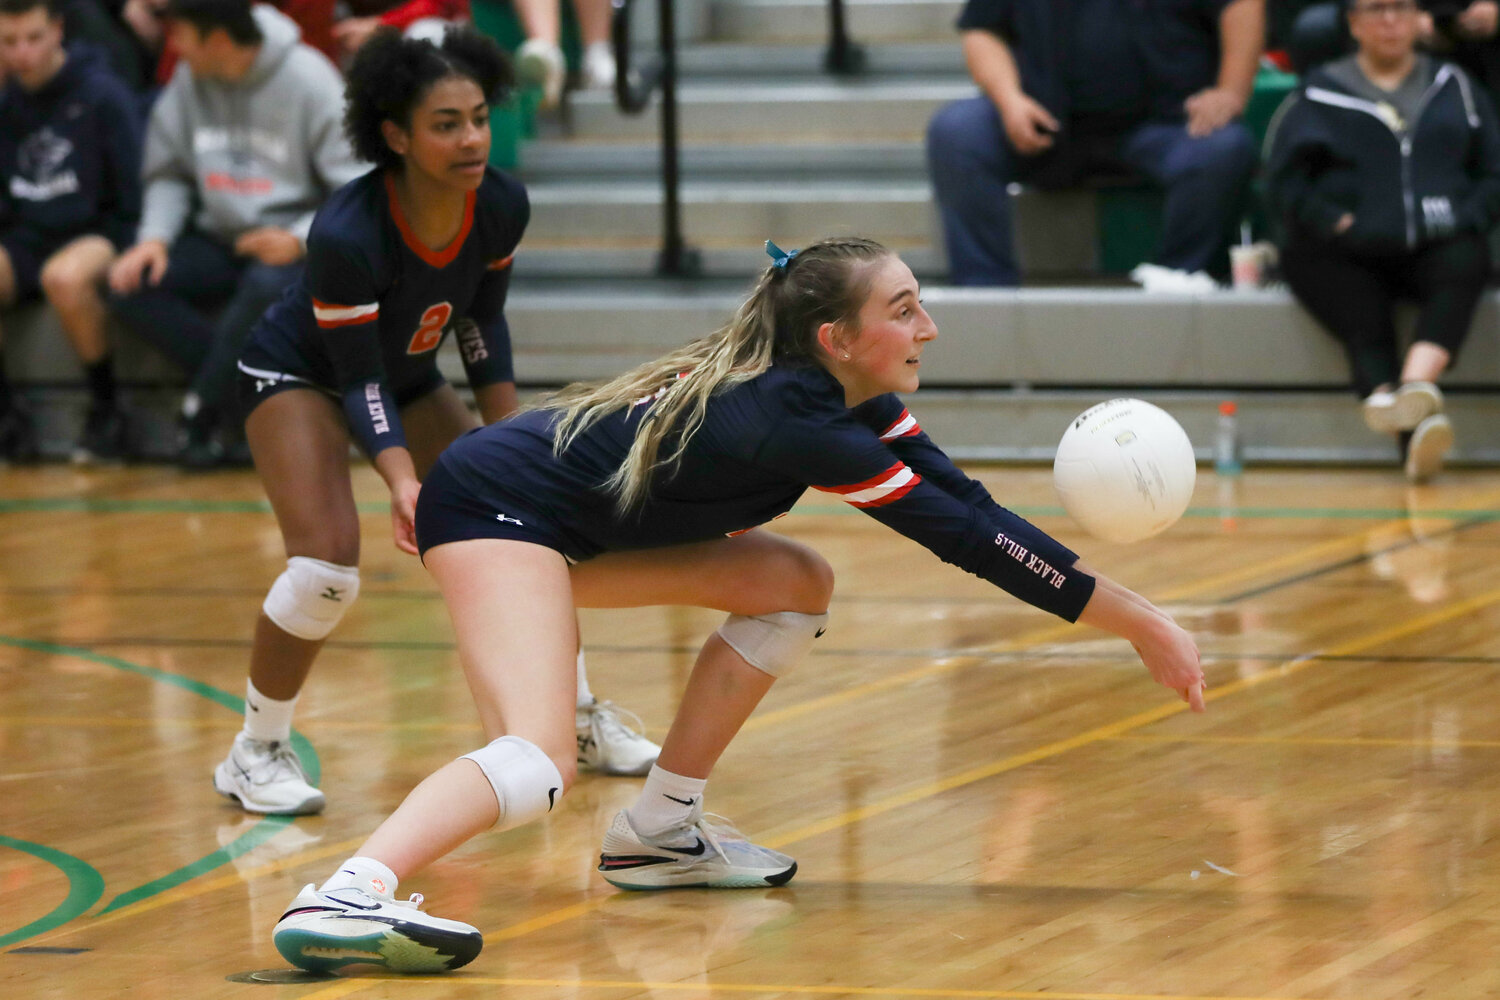 Claire Johnson lunges to her left to dig a ball during Black Hills' 3-2 win over R.A. Long in the first round of the 2A District 4 Tournament on Nov. 2 in Tumwater.